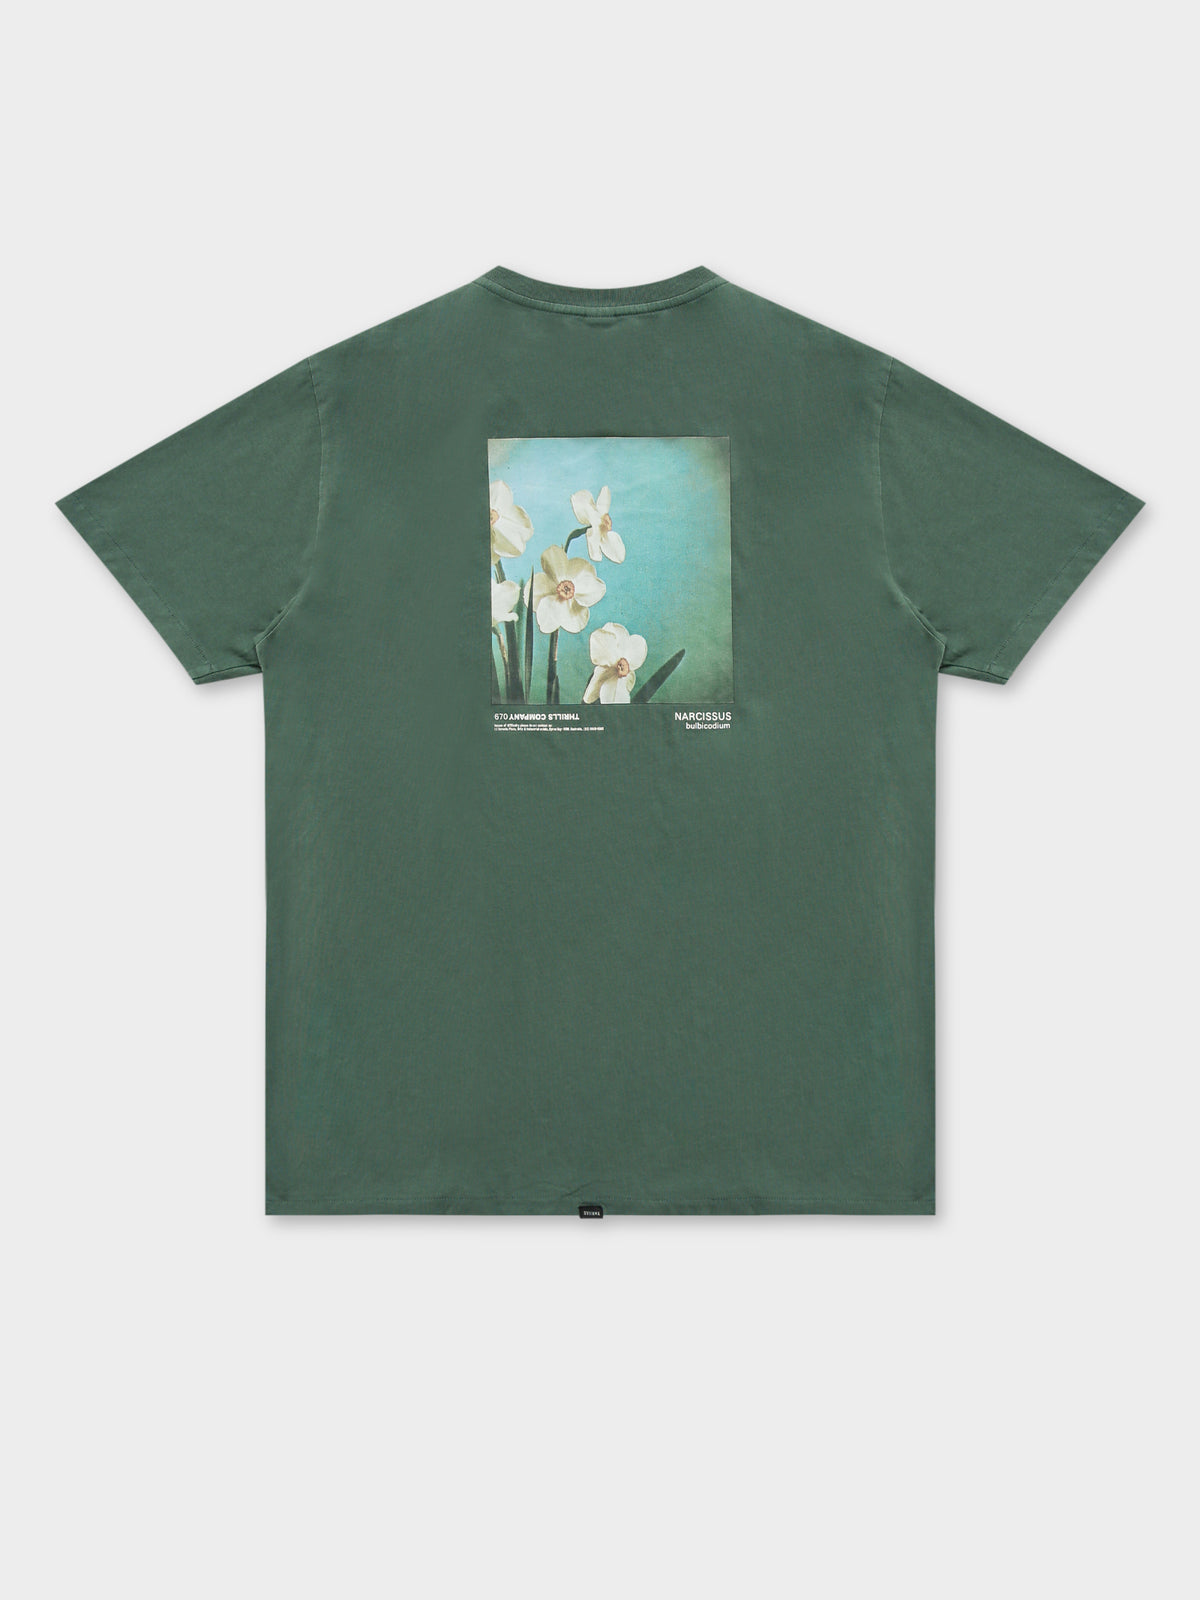 Narcissus Merch Fit T-Shirt in Teal